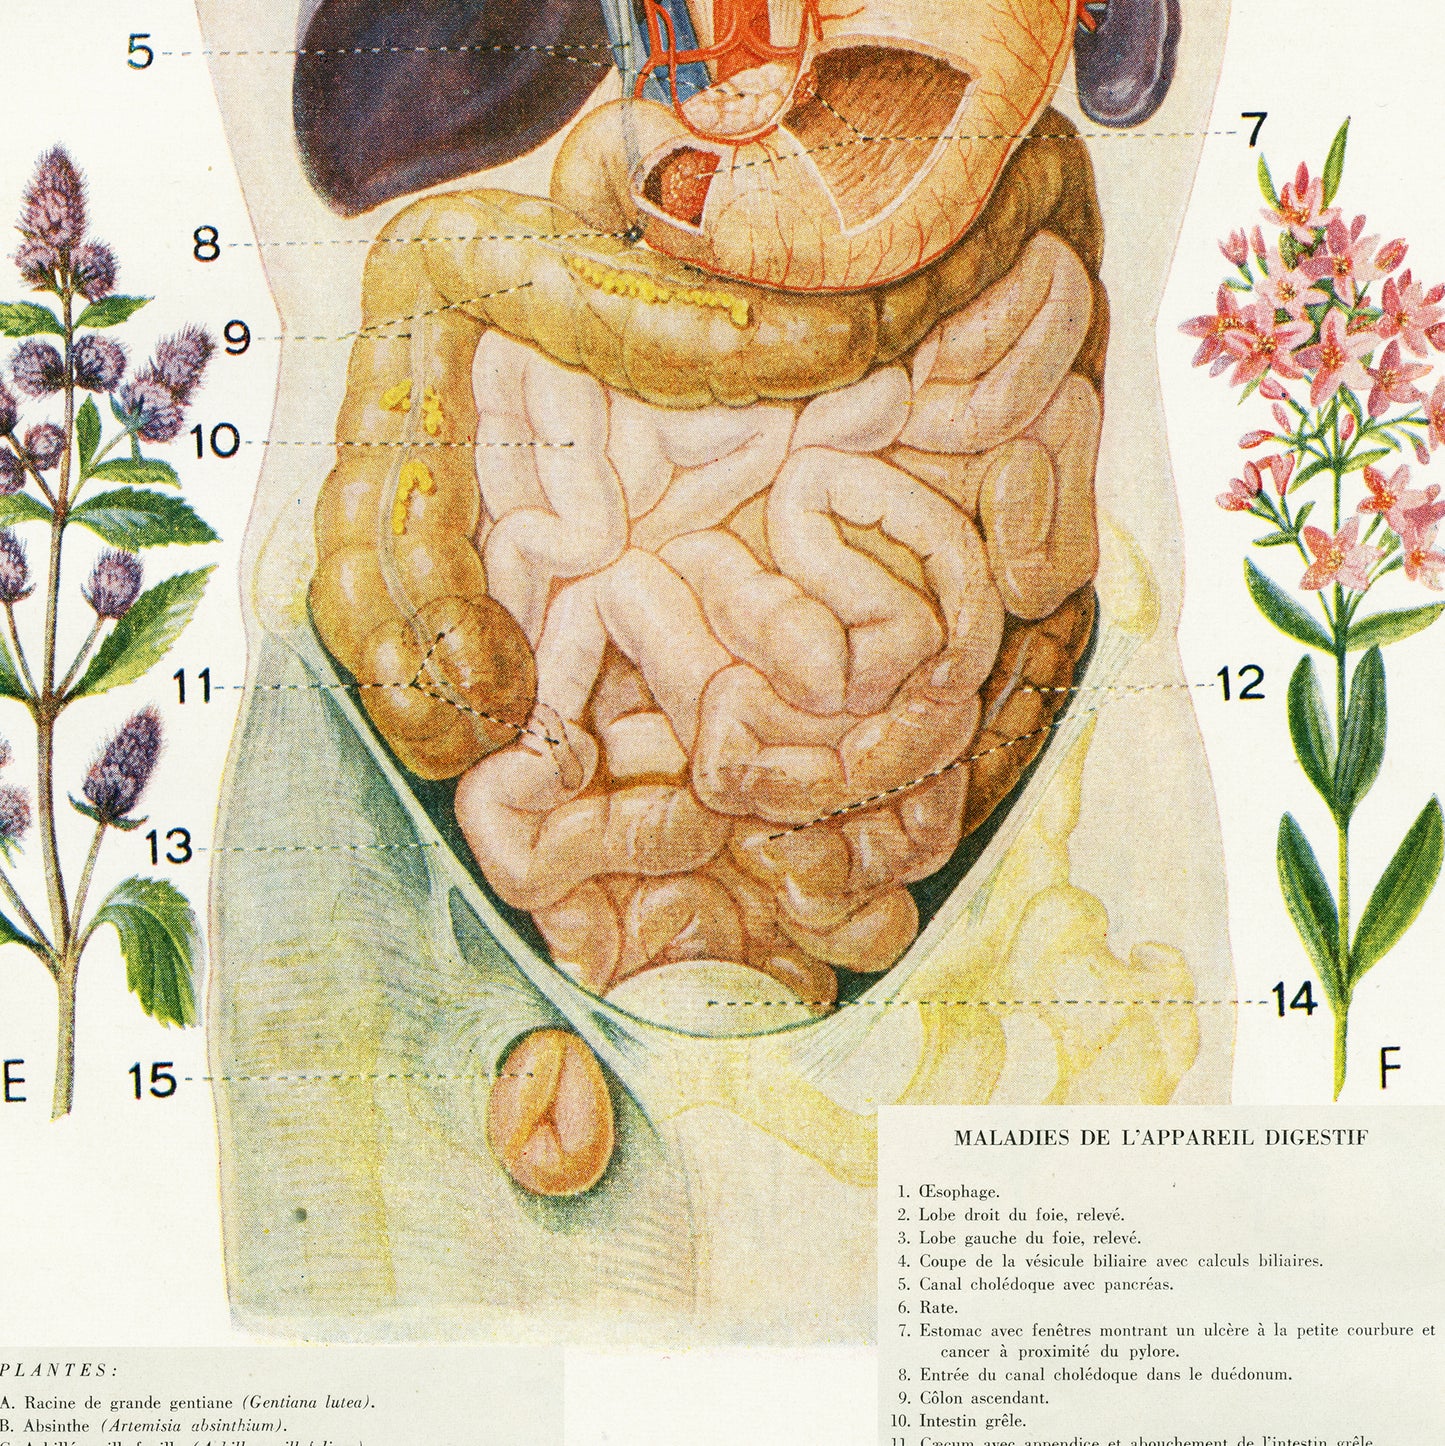 Vintage digestive system anatomy reprint from 1950